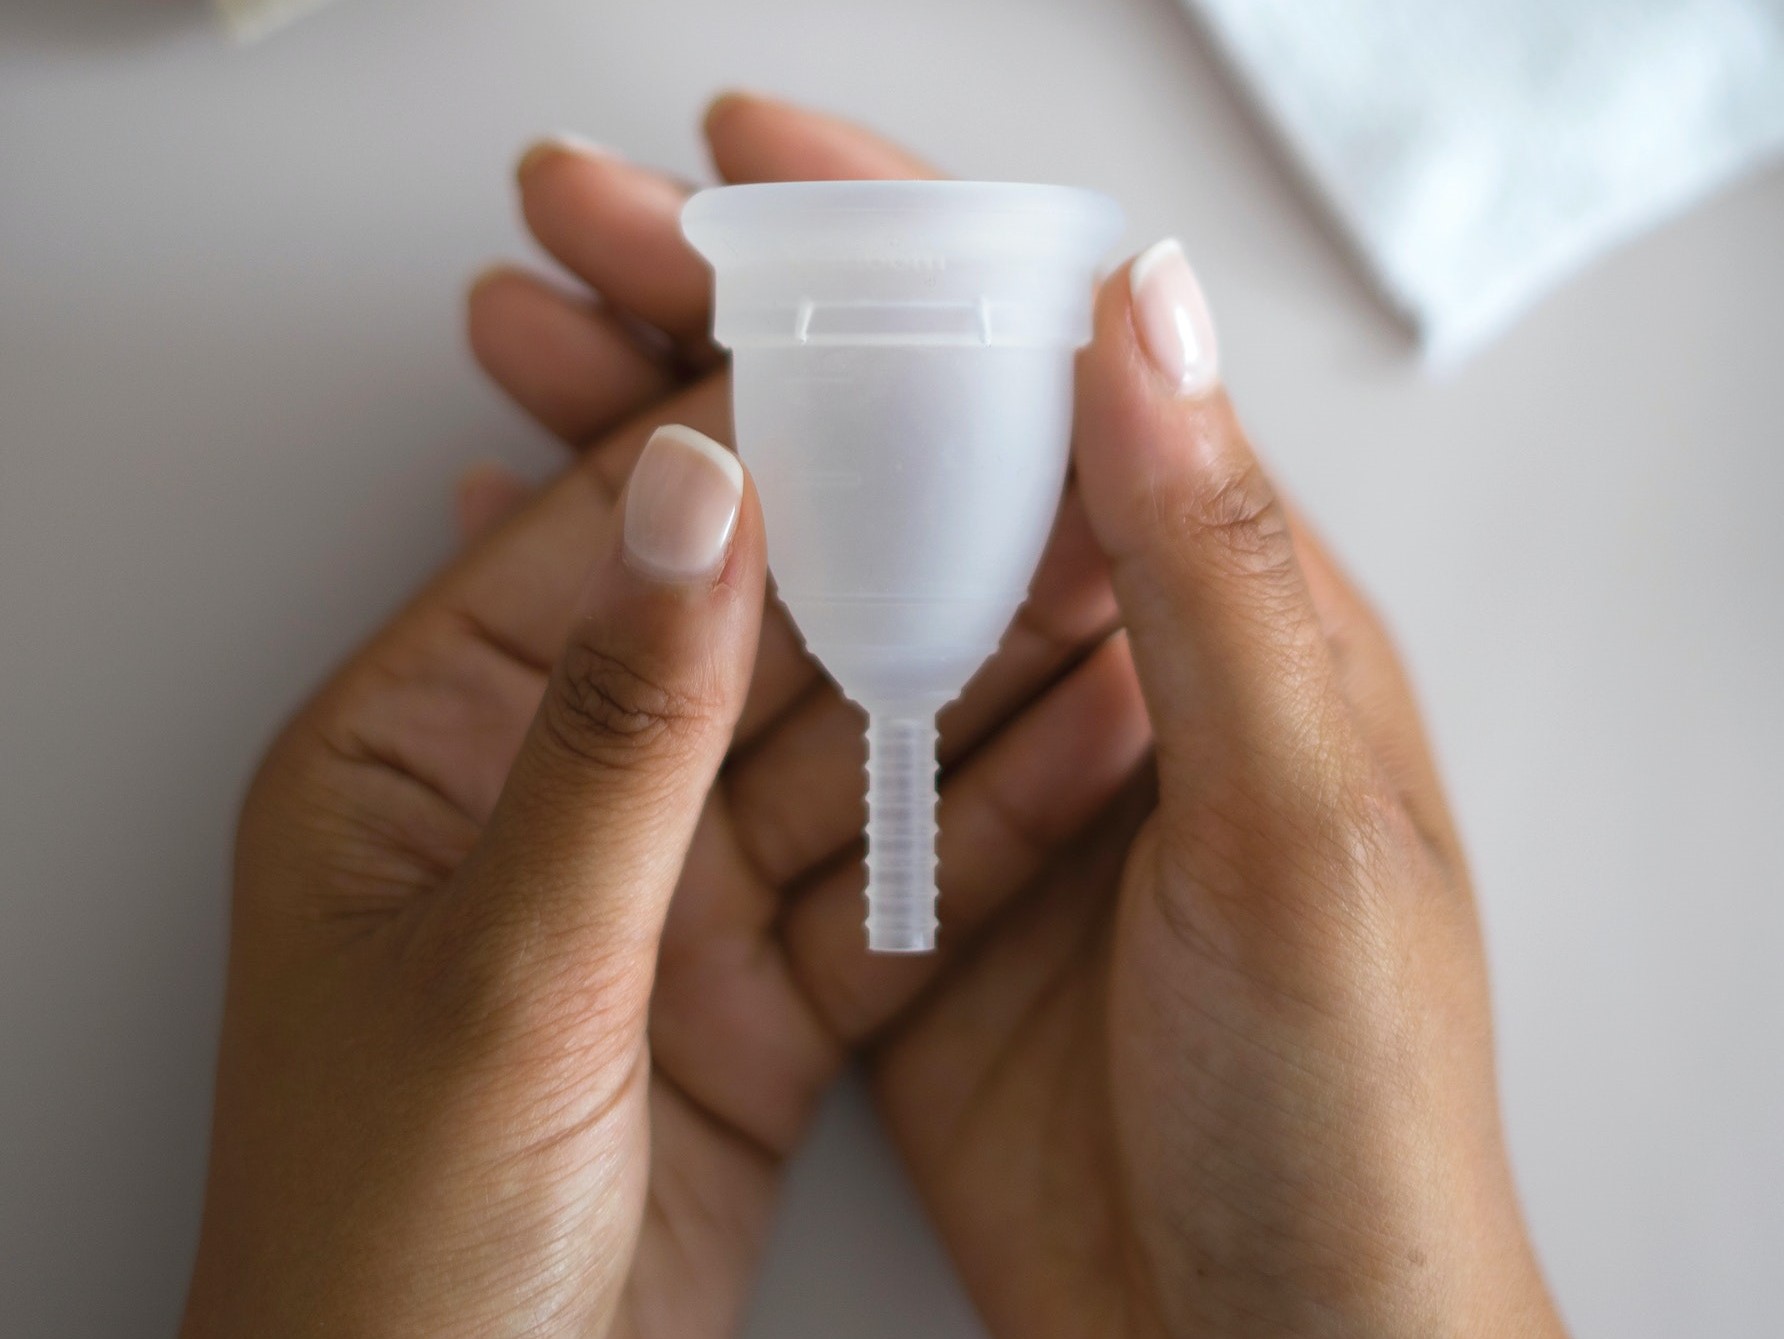 A woman holding a menstrual cup.